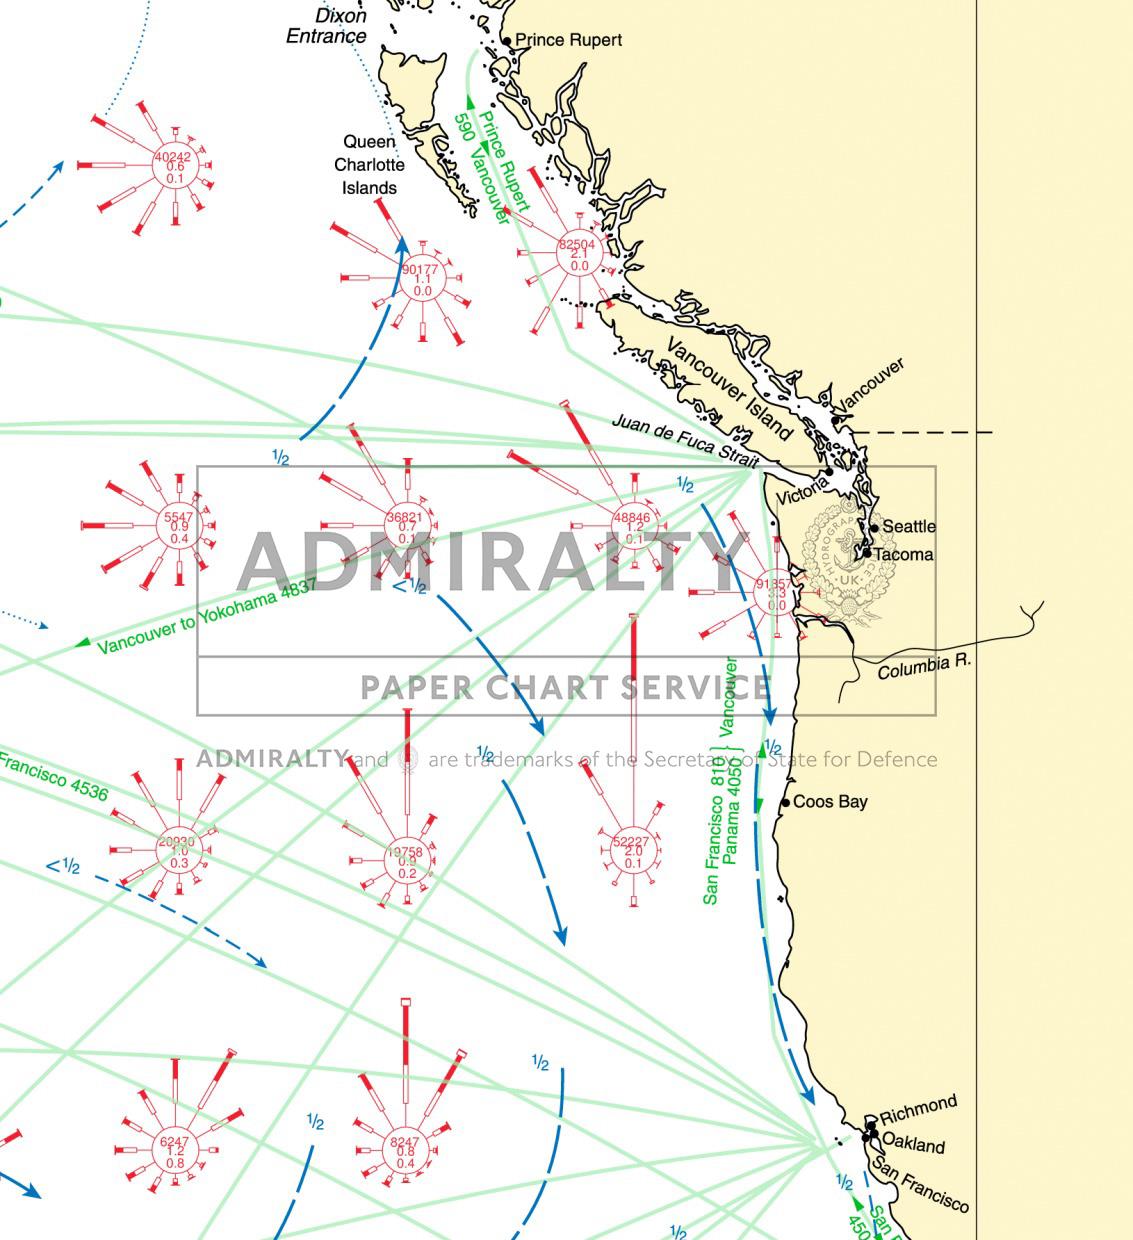 Admiralty Routeing Chart North Pacific Ocean (July)